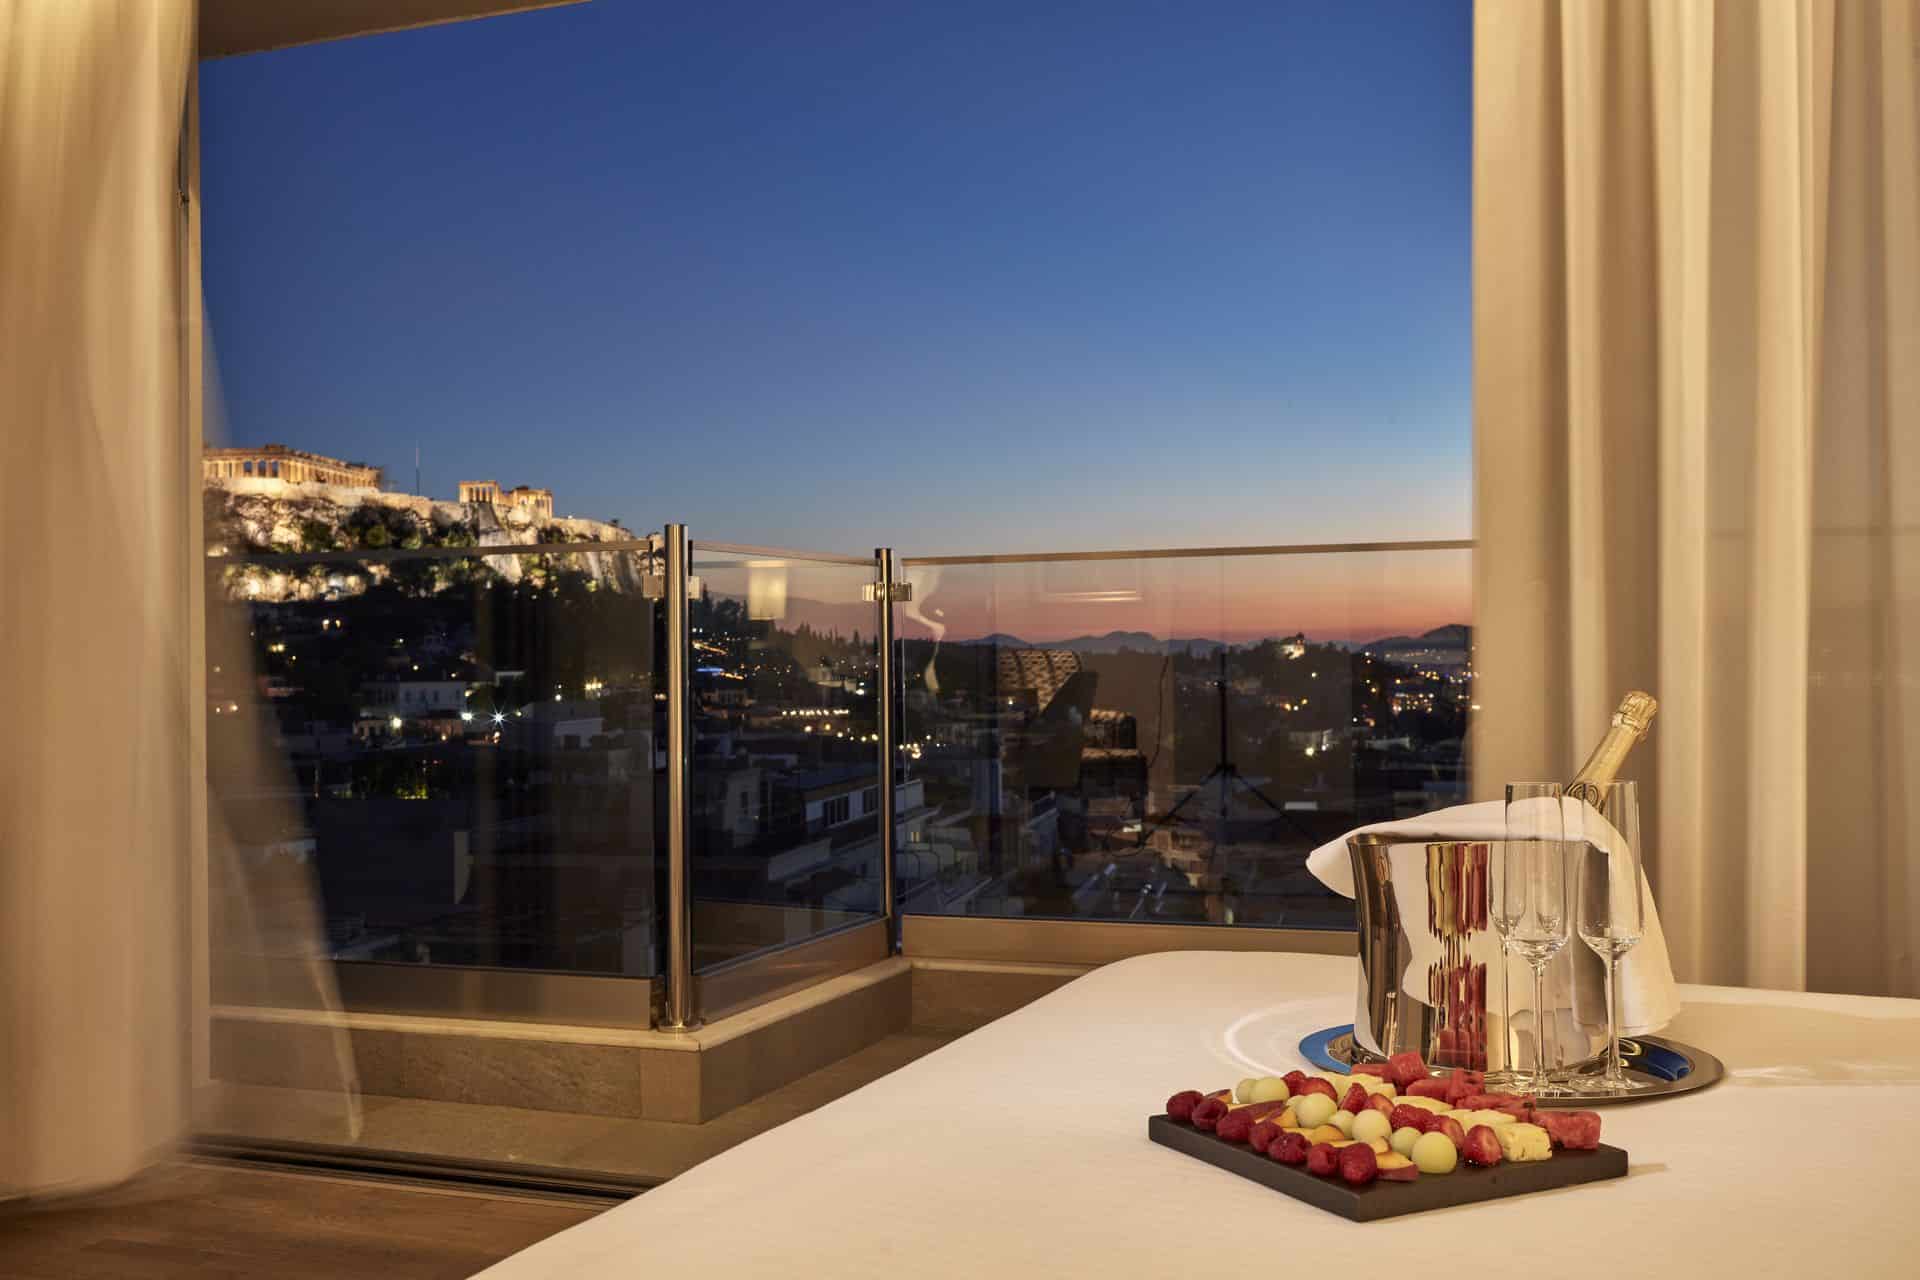 Evening view of the Acropolis from the Acropolis Suite at Electra Metropolis hotel in Athens, for your most romantic getaways in Greece's capital.